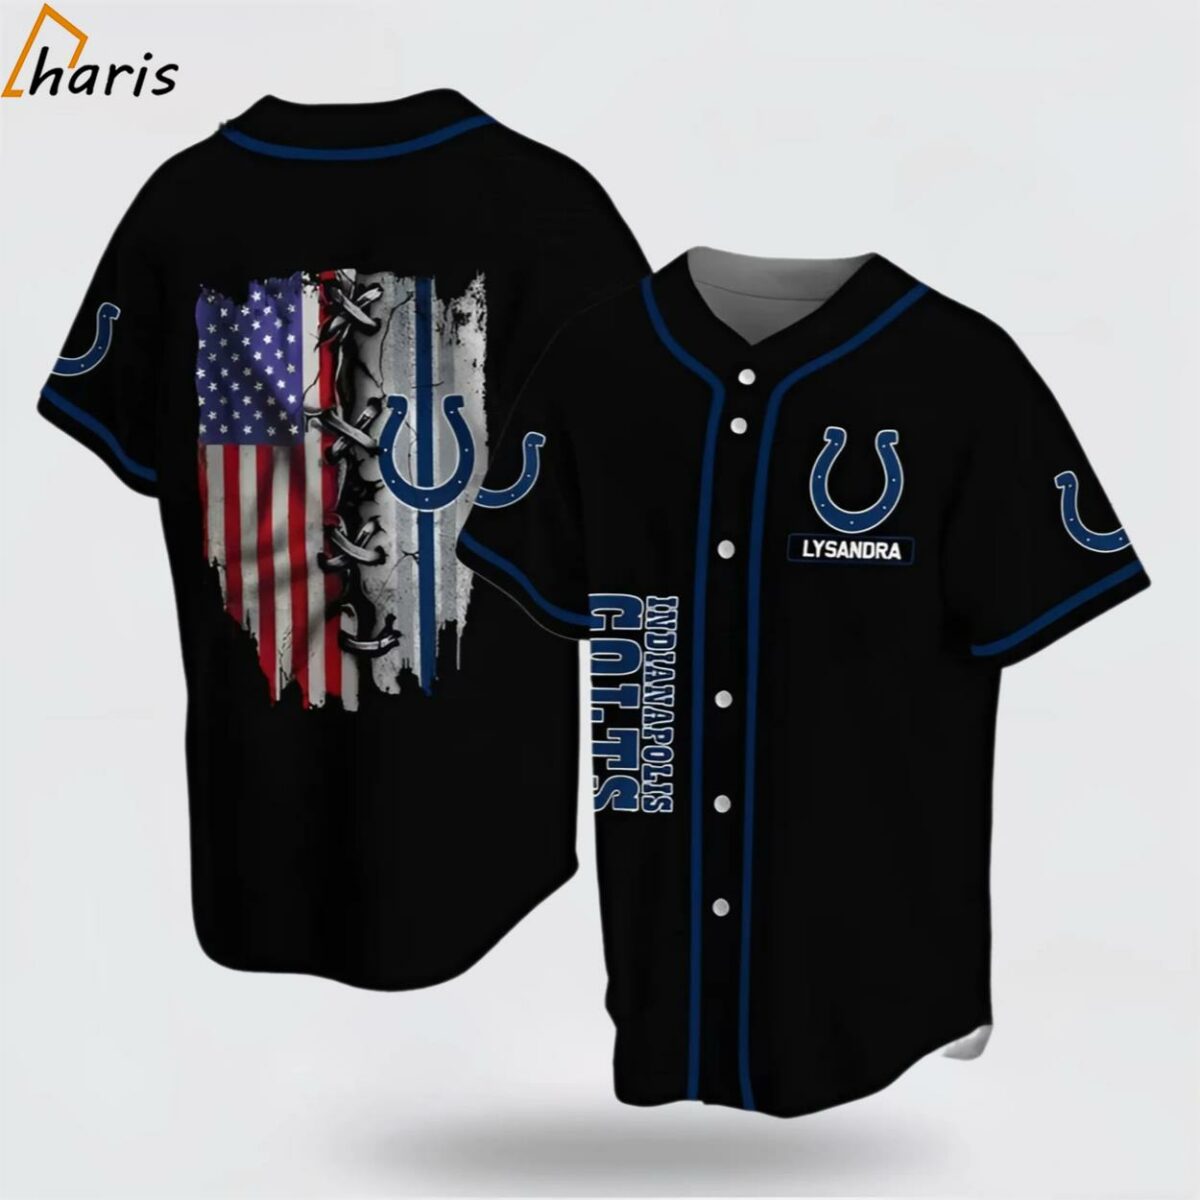 Indianapolis Colts Personalized Baseball Jersey Gift Ideas For Fans NFL 1 jersey